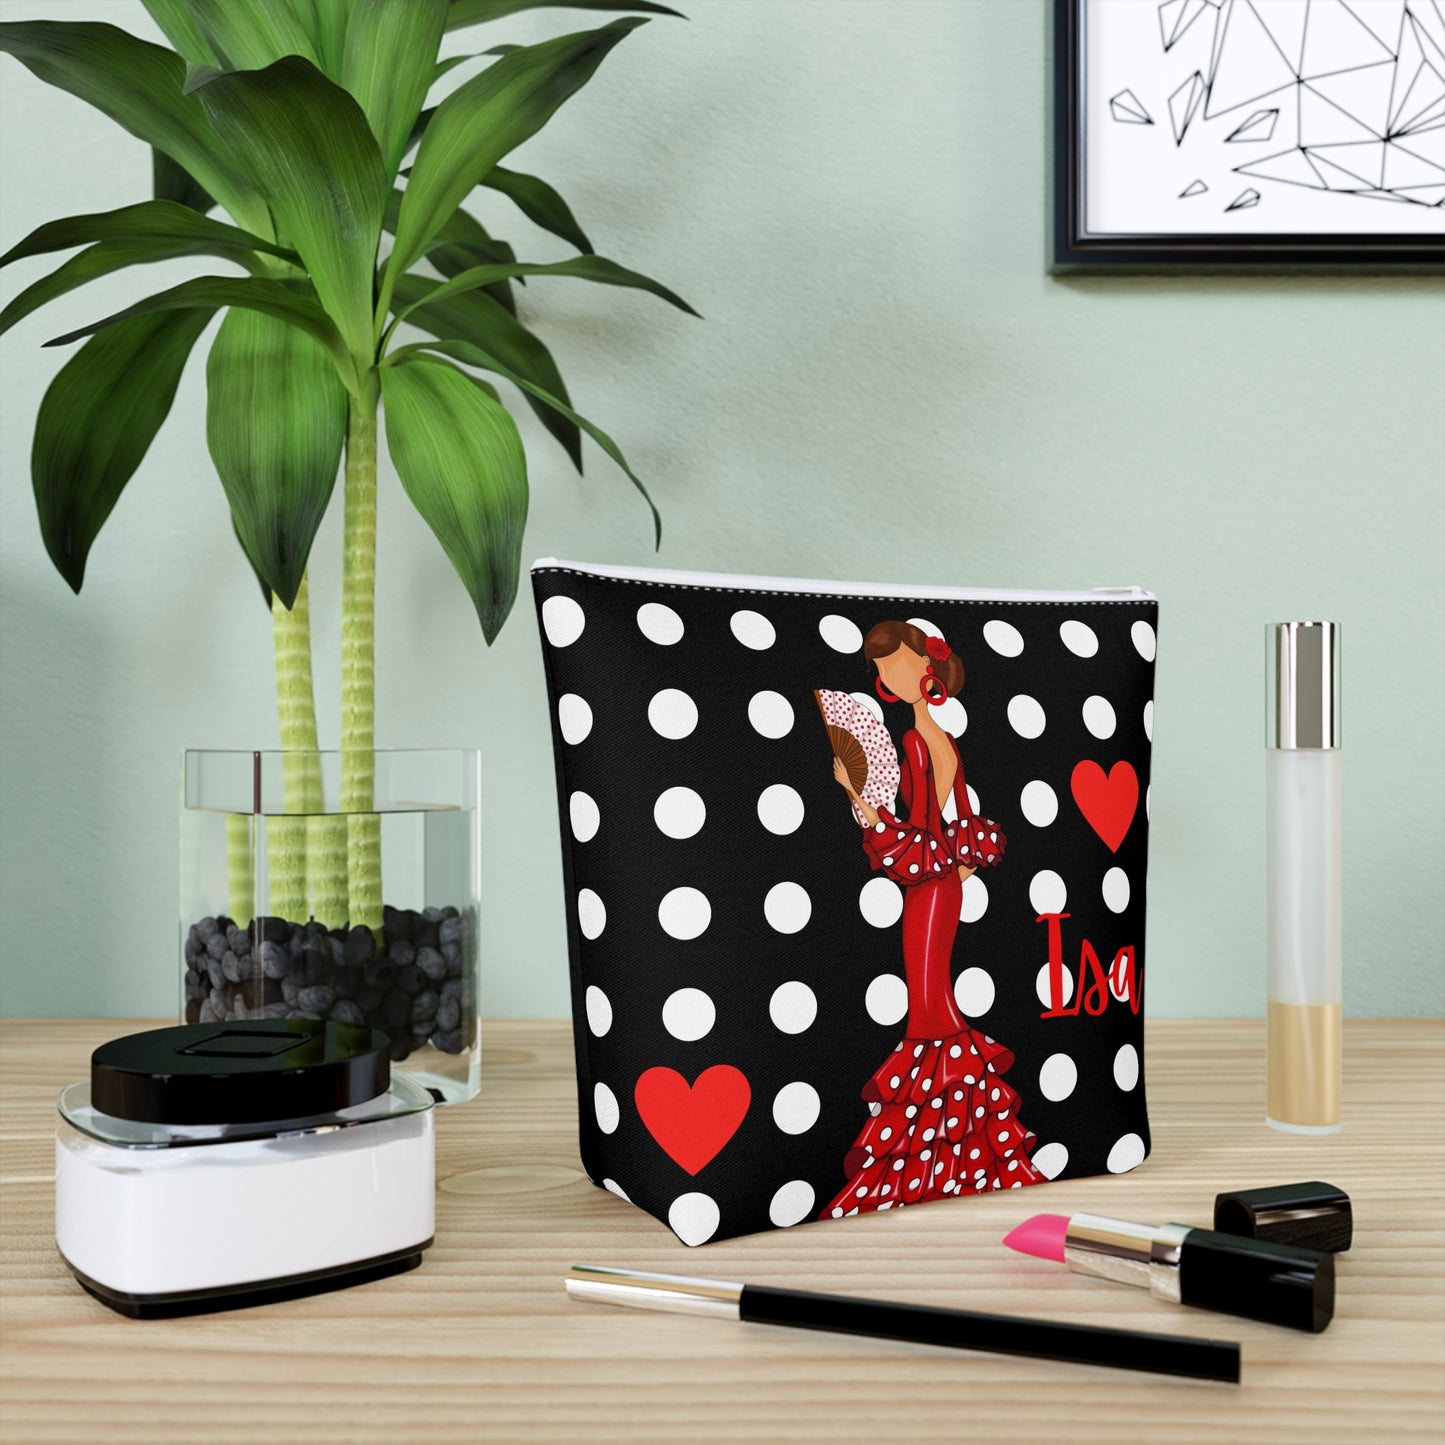 a polka dot purse with a lady in a red dress